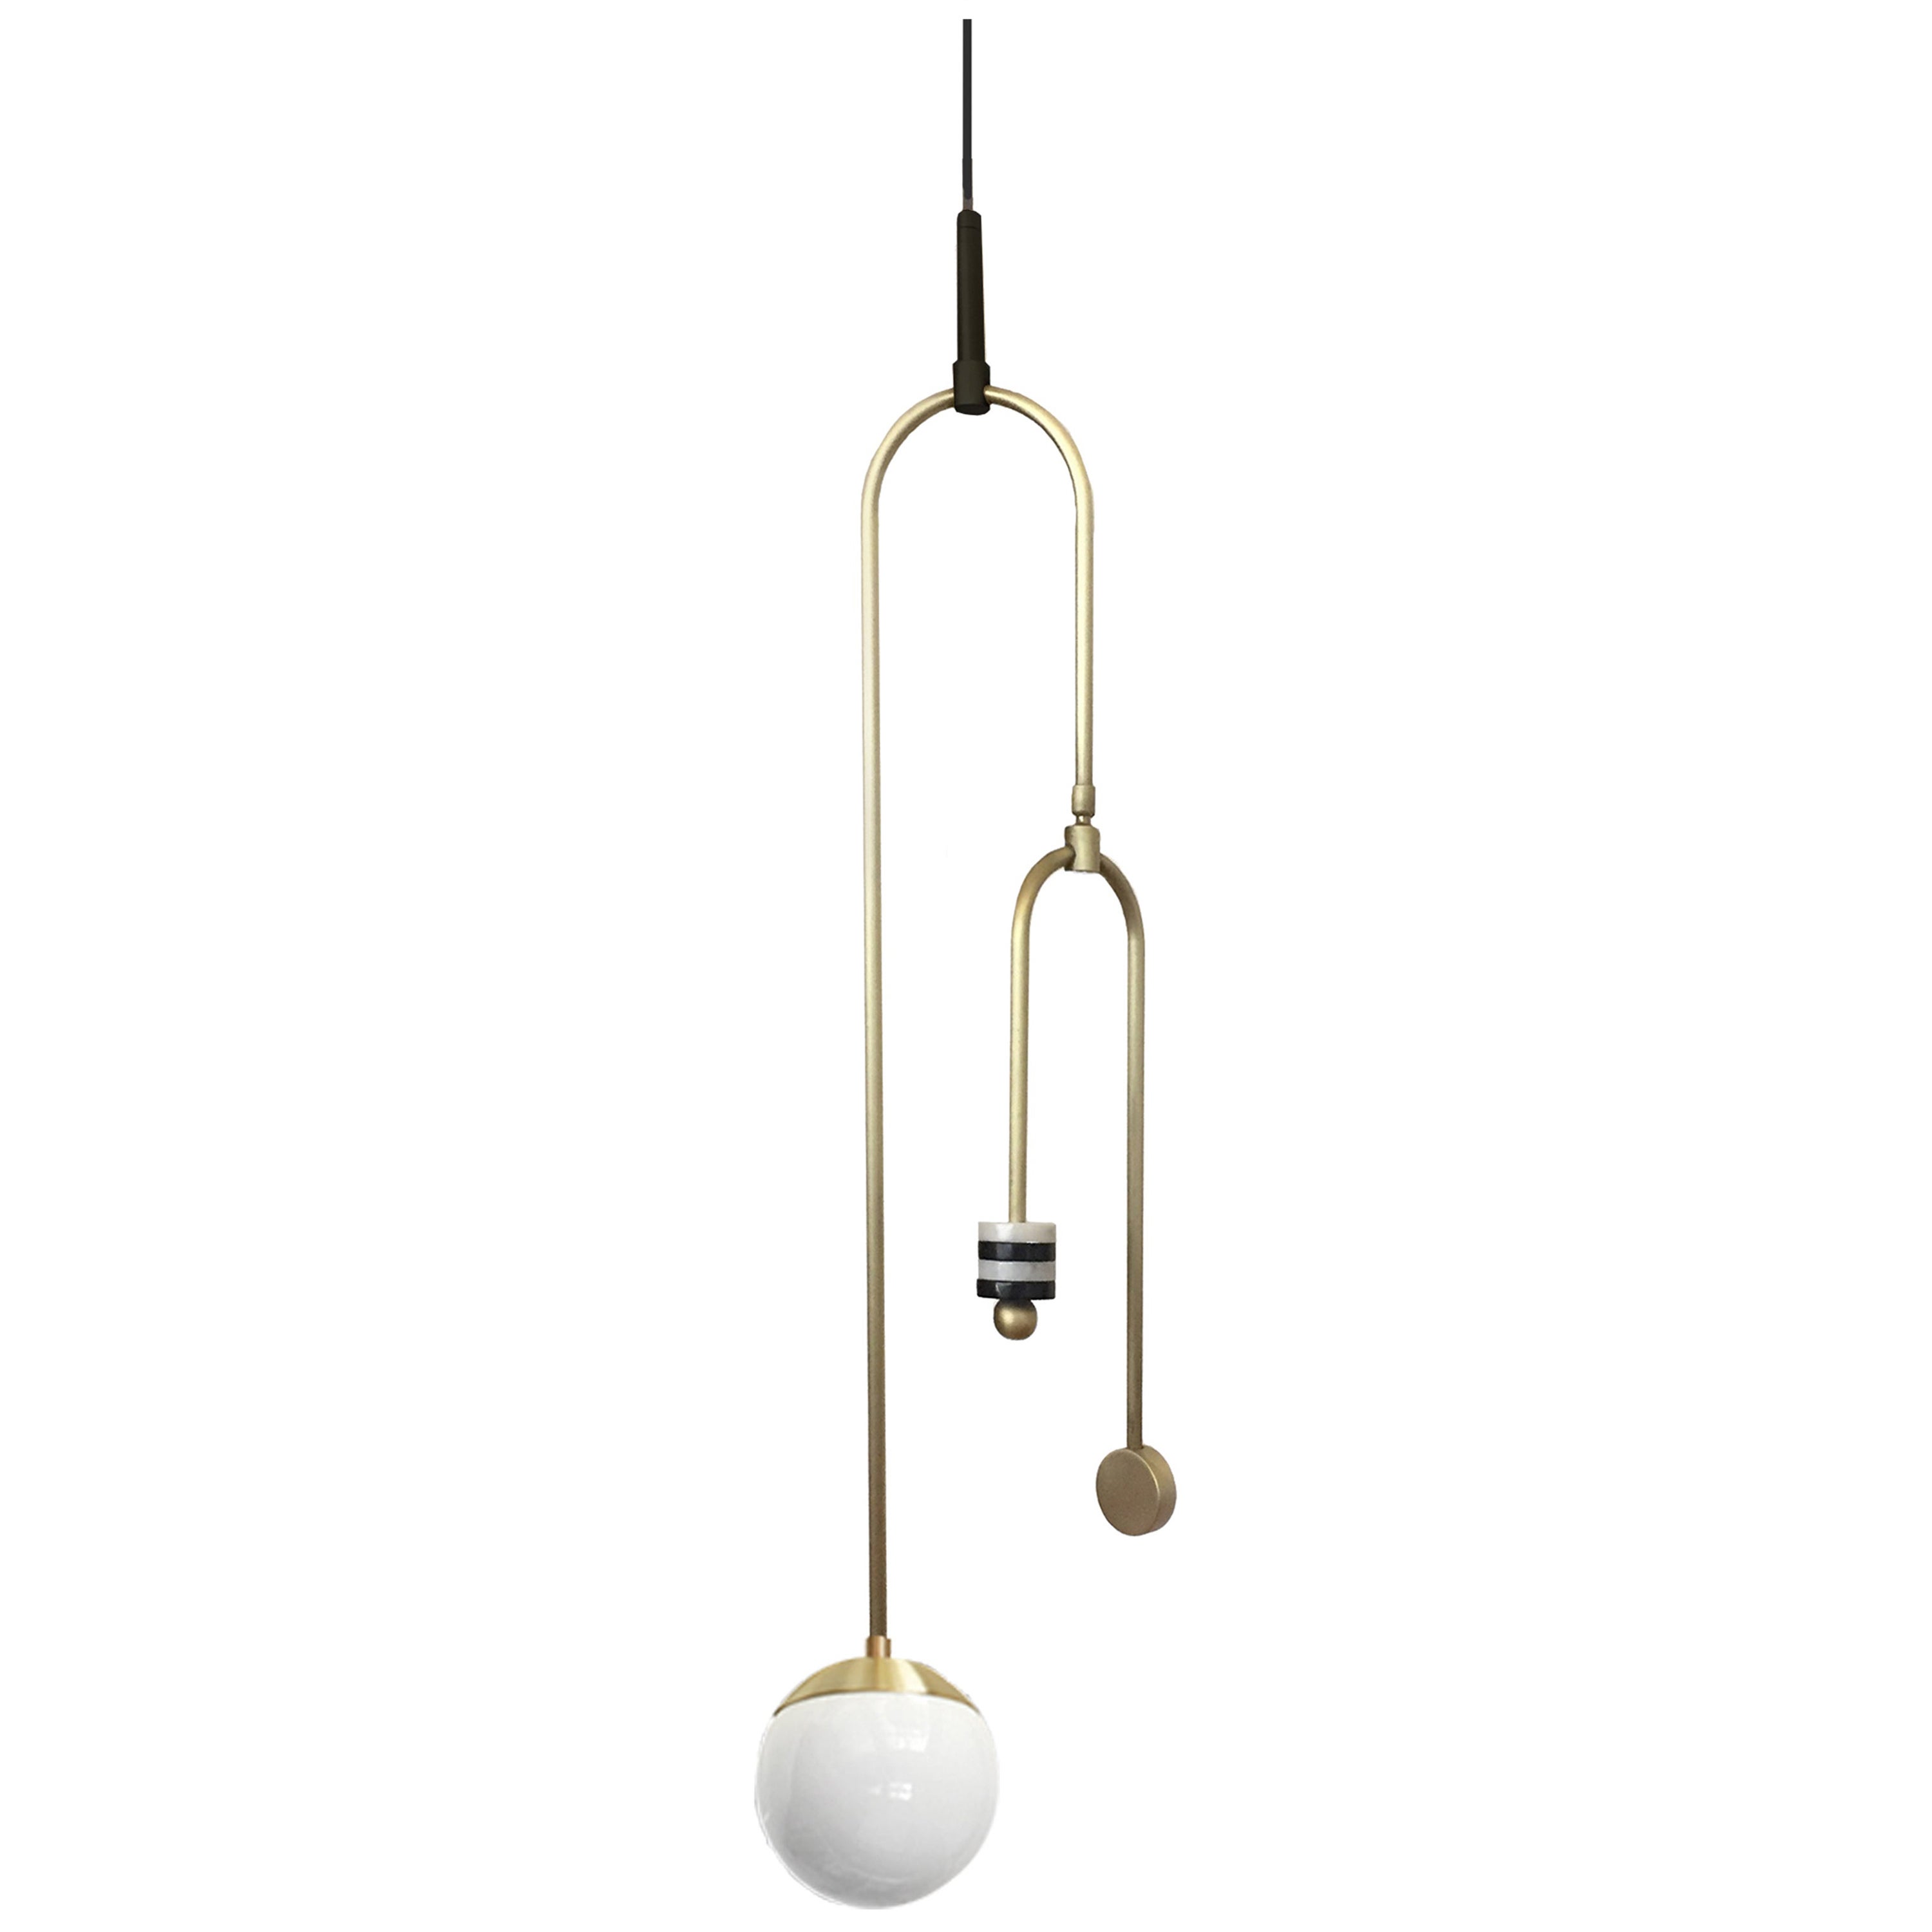 FLOW VERTICAL PENDANT LAMP, Contemporary, Sculptural Lighting by Rebeca Cors